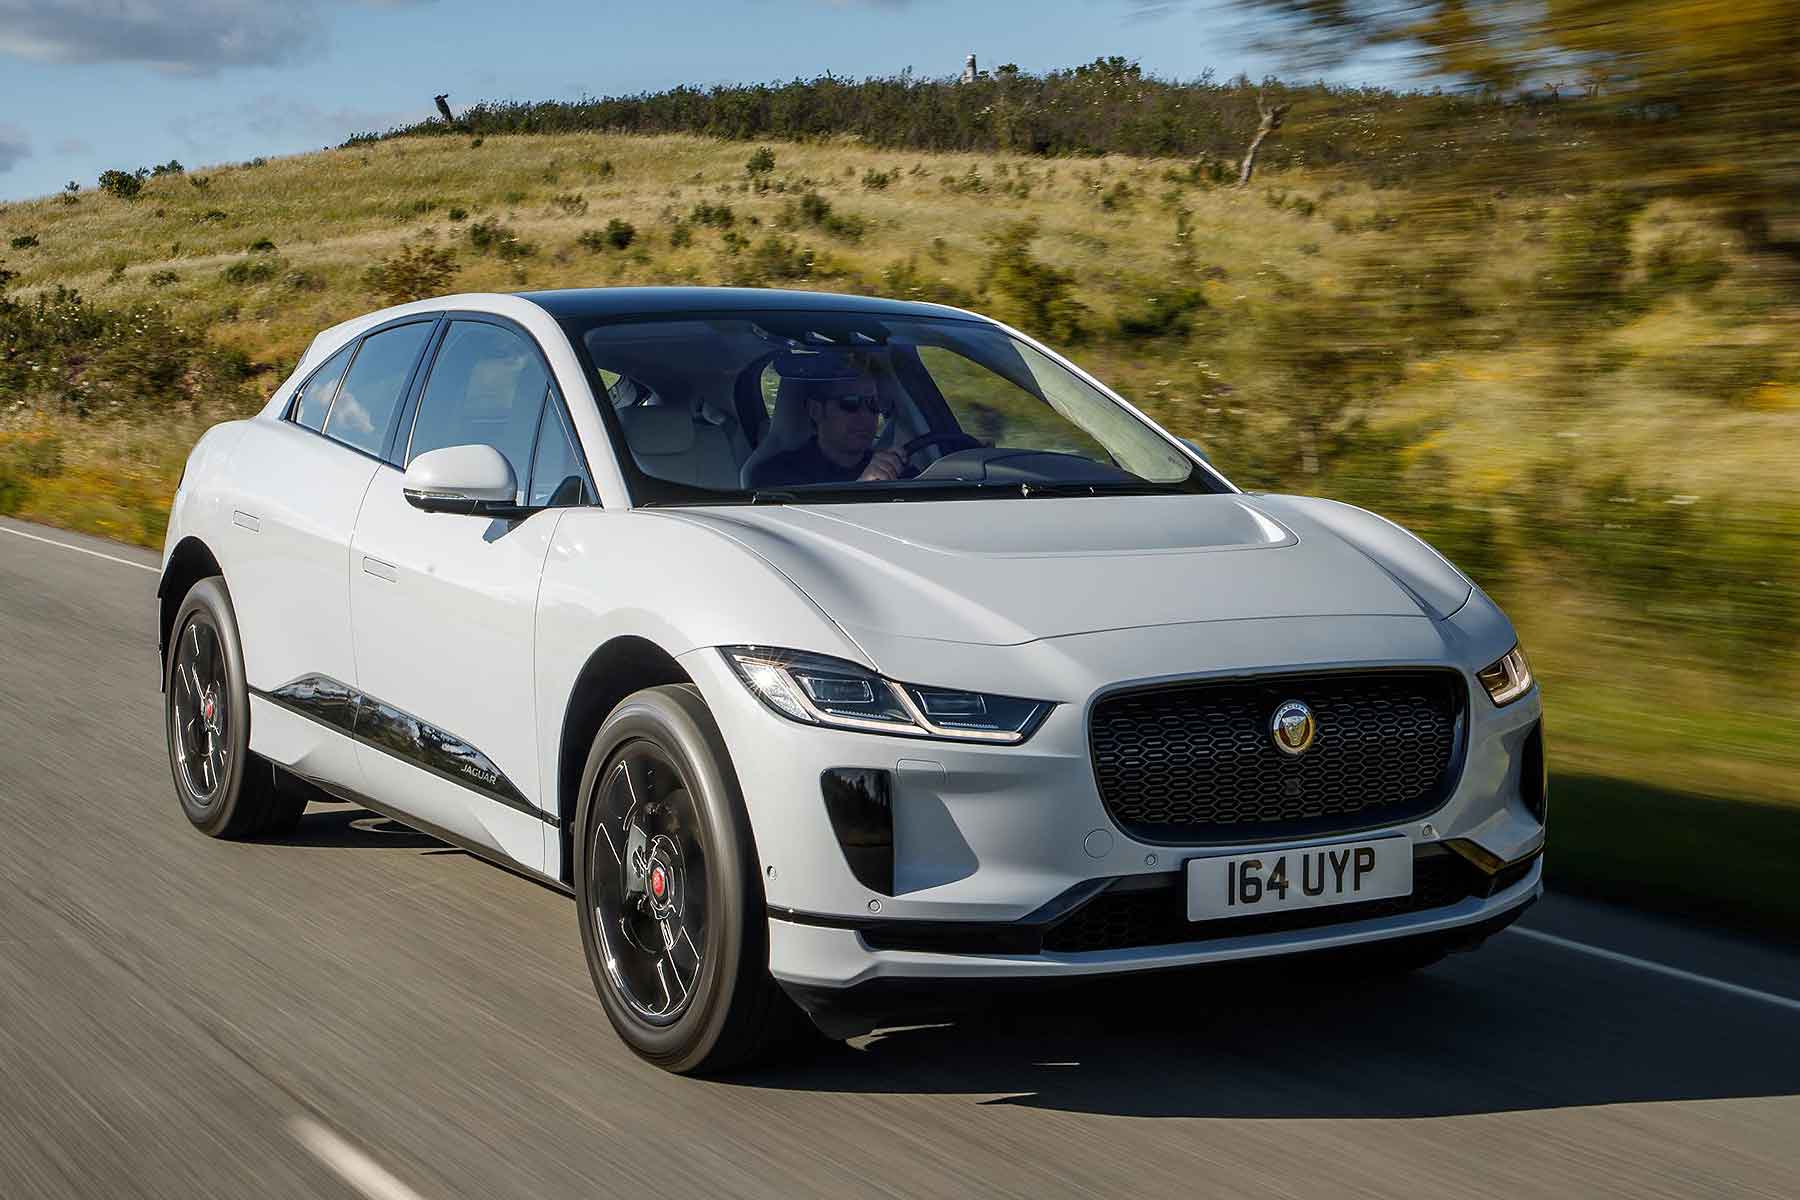 Jaguar I-Pace prices from £58,995